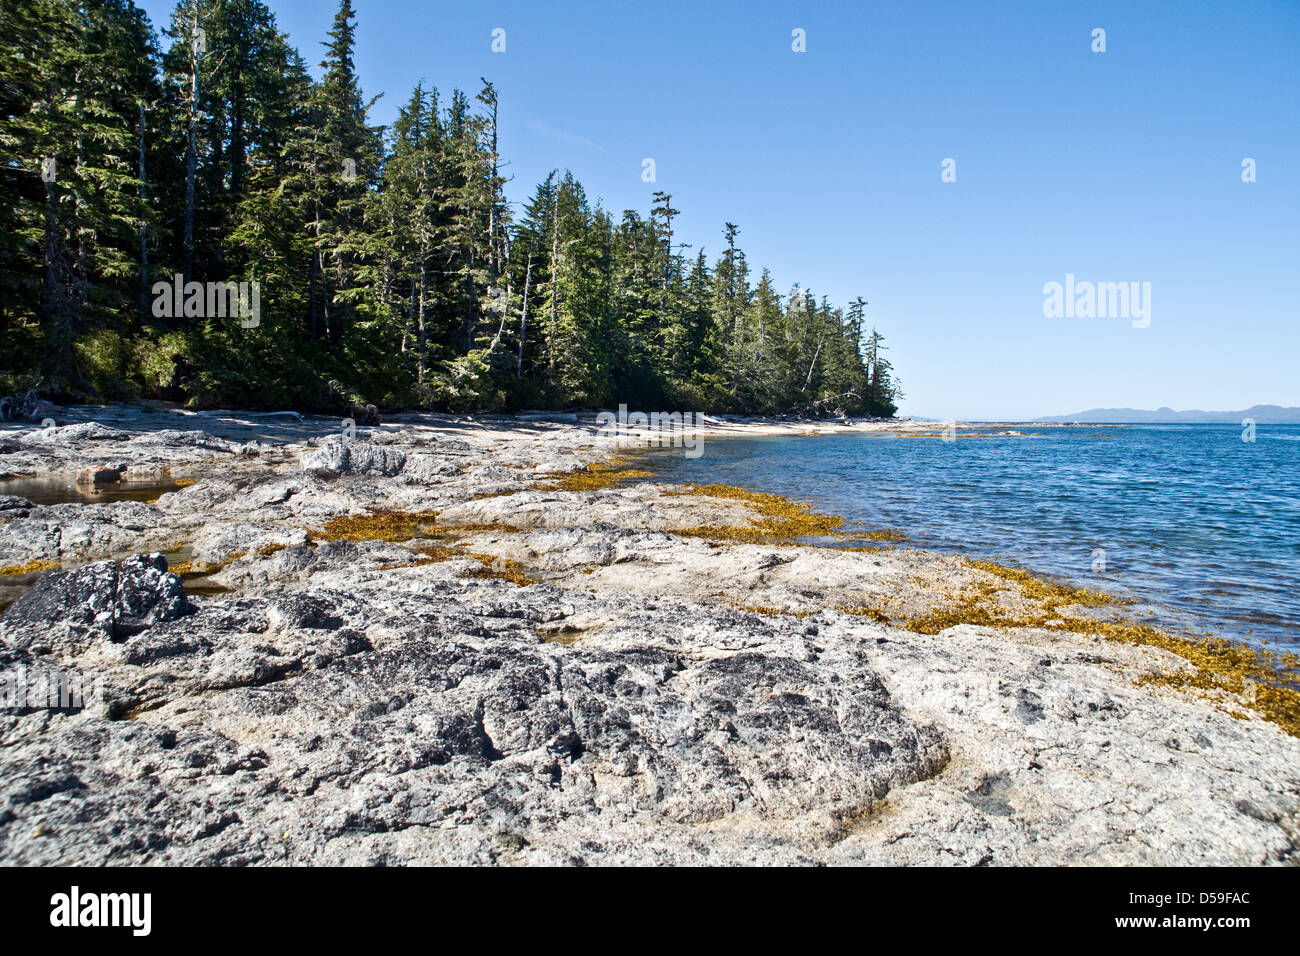 A rocky shoreline at low-tide on the west coast of Swindle Island in the Great Bear Rainforest, British Columbia, Canada. Stock Photo